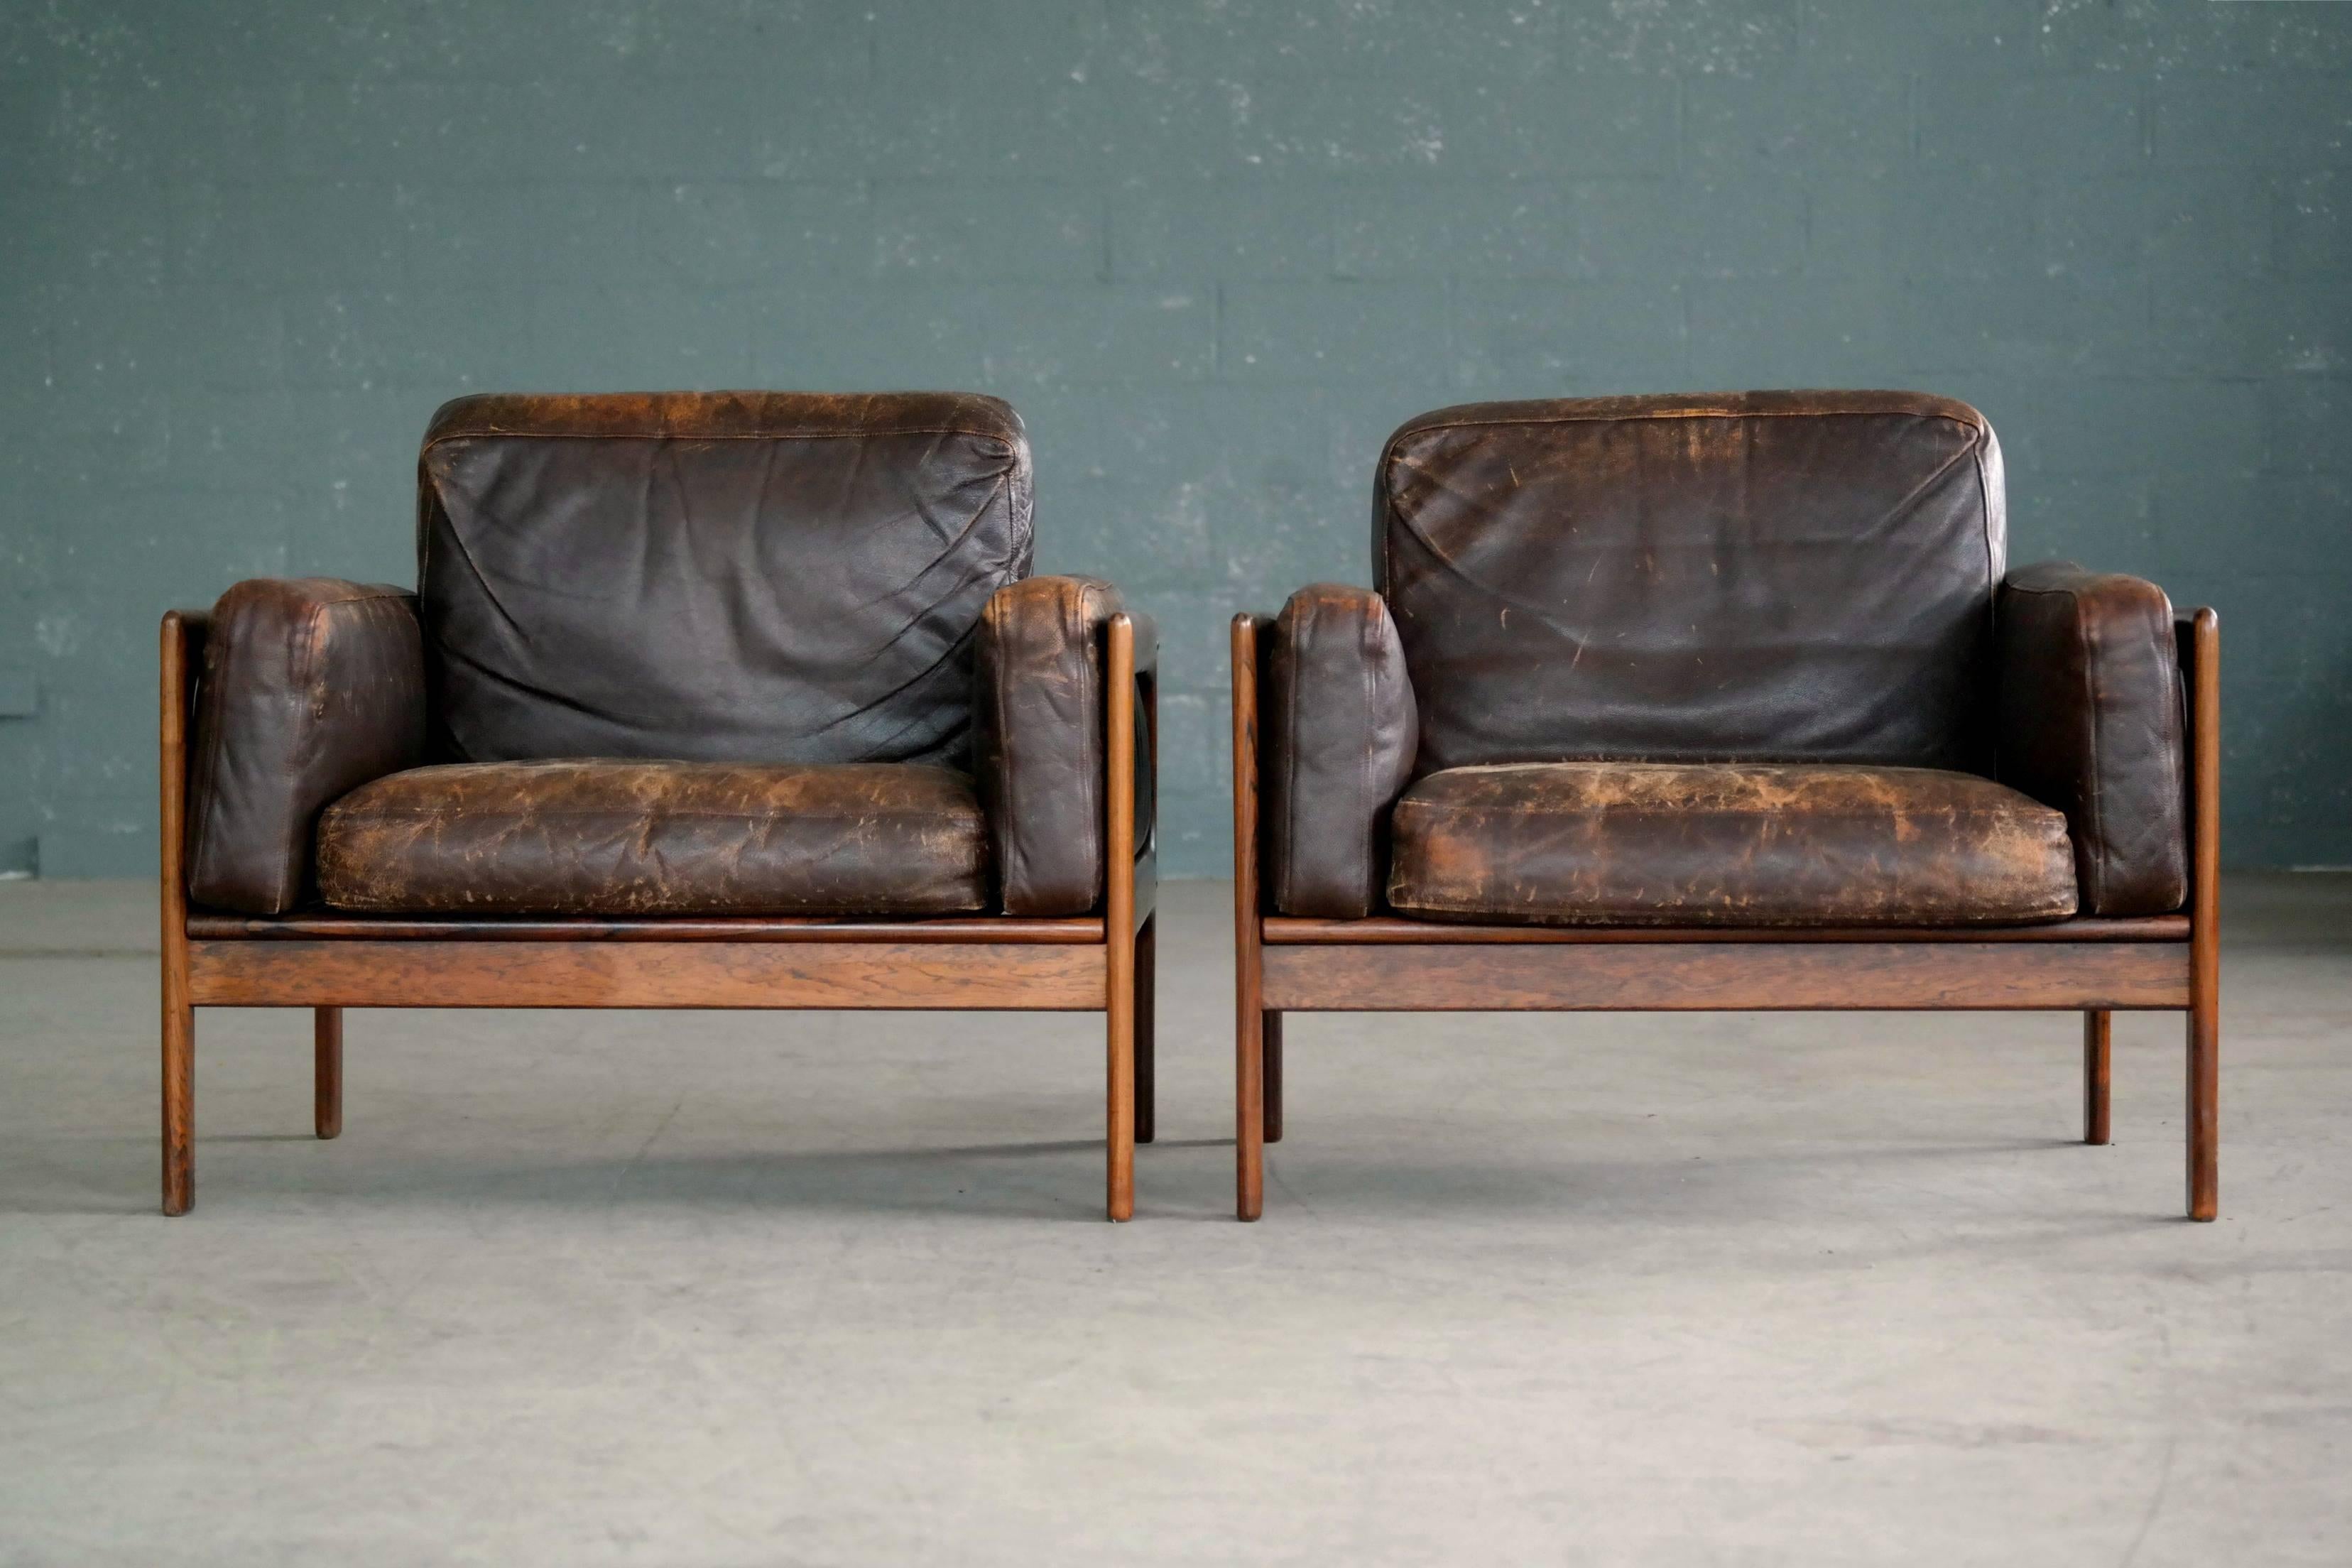 Fantastic and rare pair of easy chairs designed by Arne Wahl Iversen for Komfort Mobler of Denmark in the 1960s. Chocolate brown patinated leather with just perfect age wear on frames of Brazilian rosewood. The wood is in excellent condition with